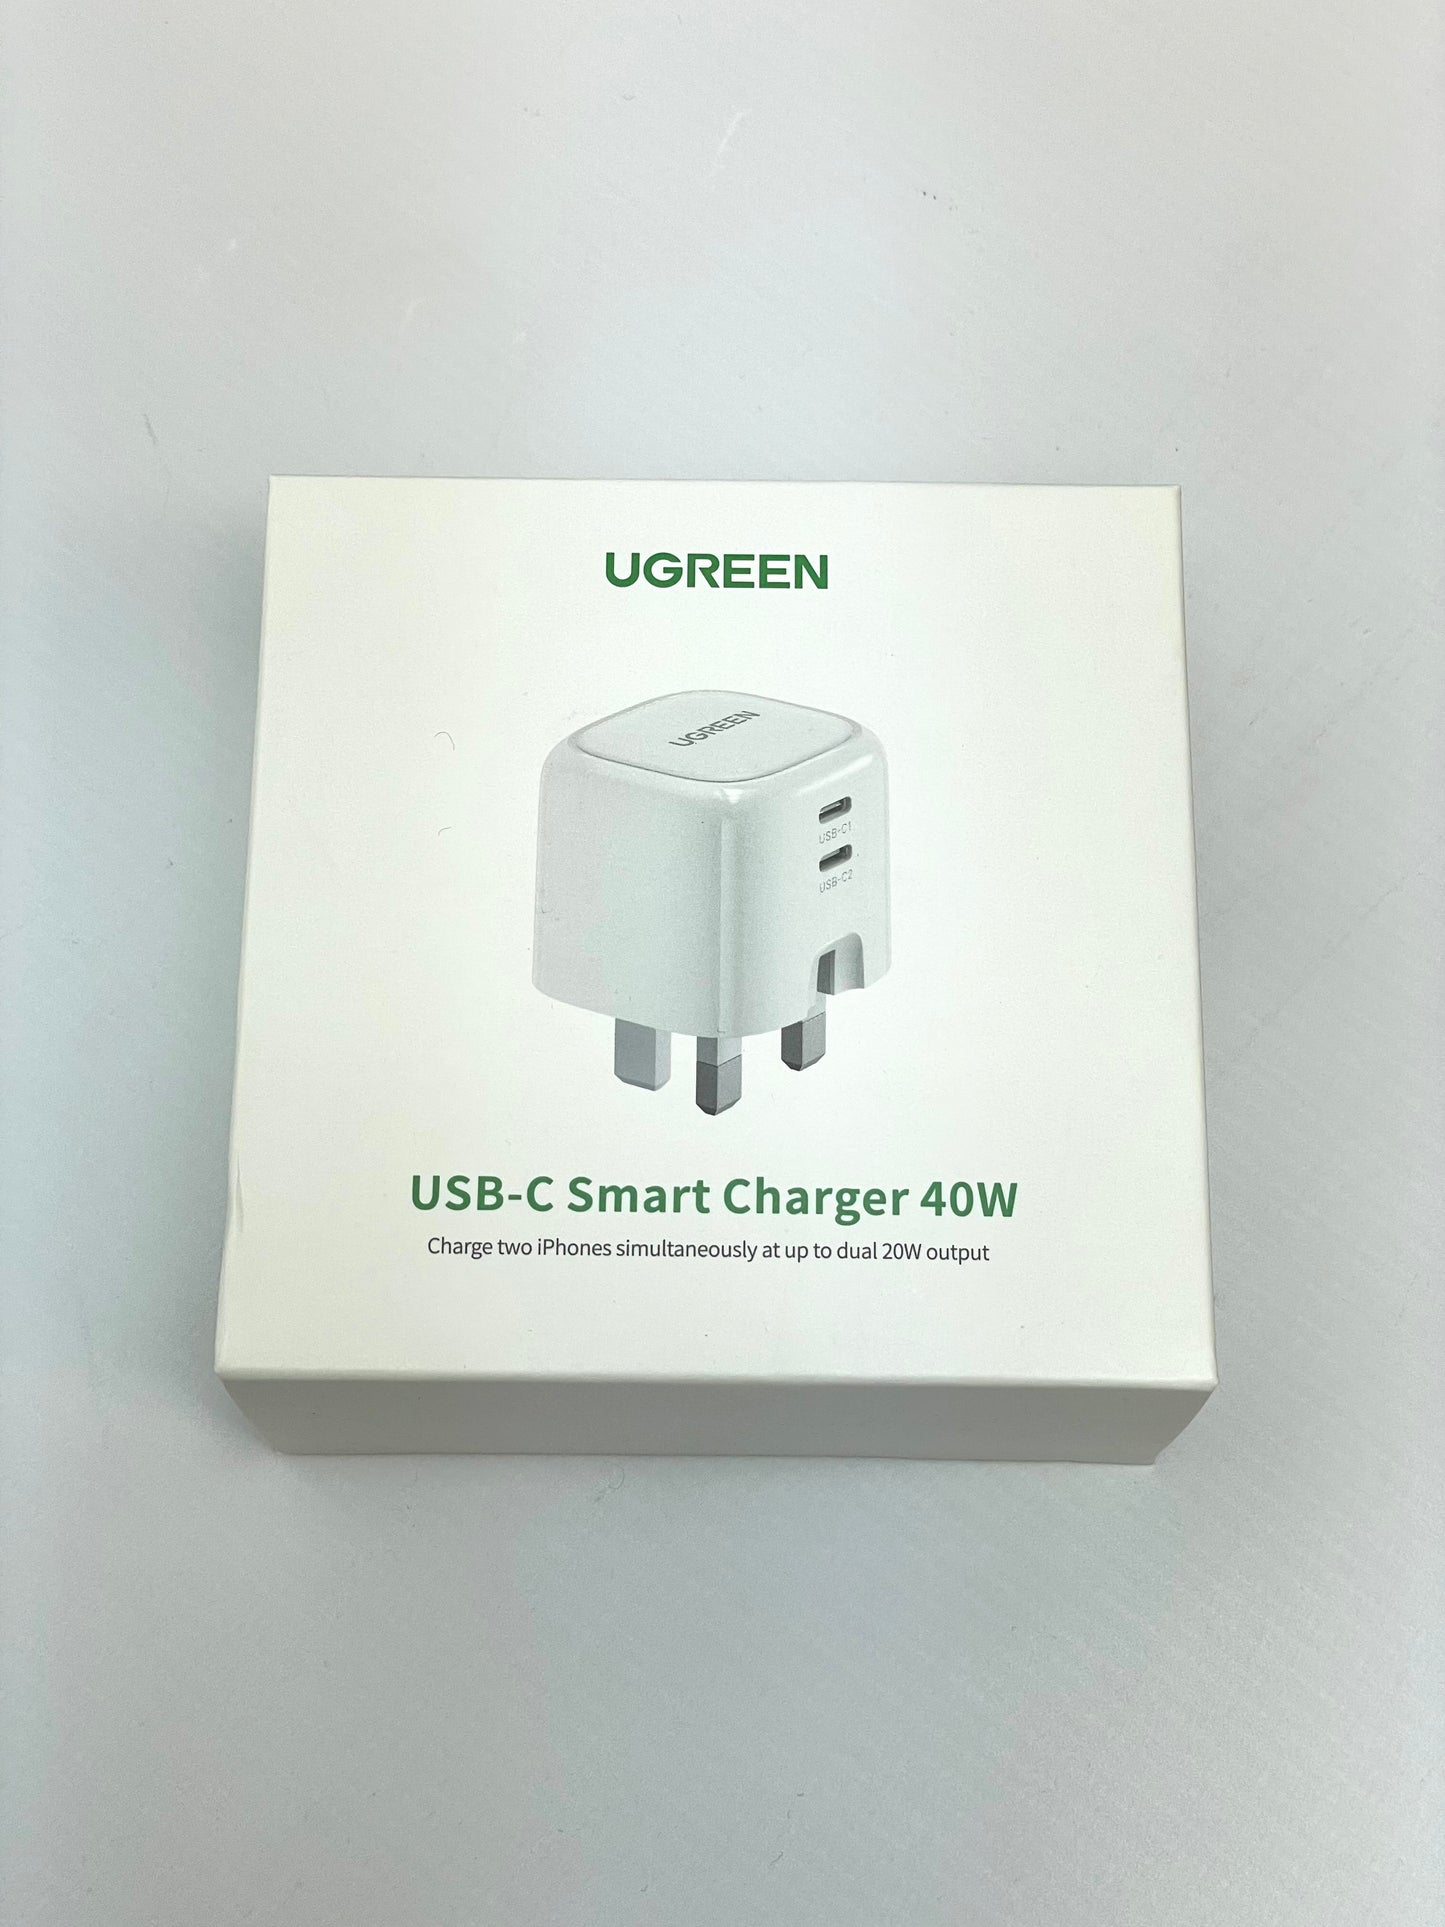 Ugreen USB C Smart Charger 40W Foldable Dual USB C Charger in White